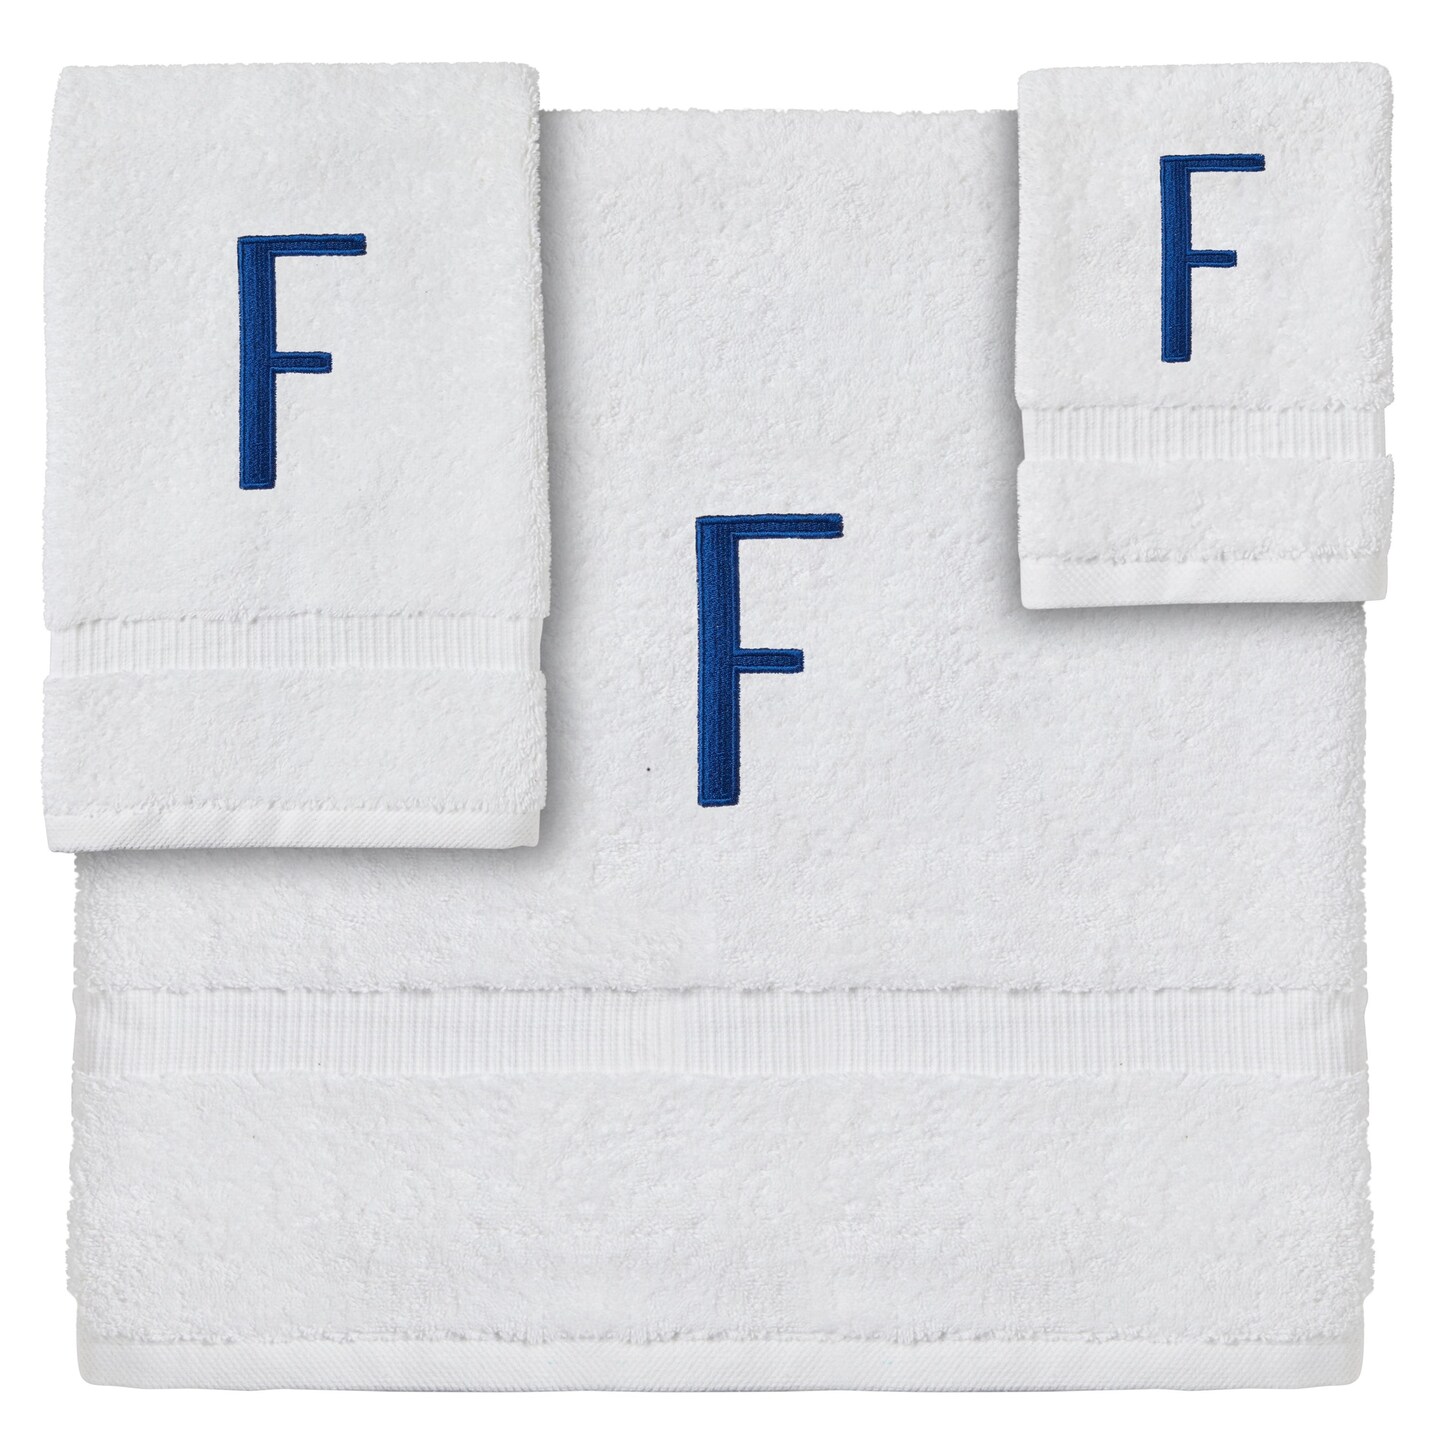 His or Hers Embroidered Luxury Cotton Bath Towel